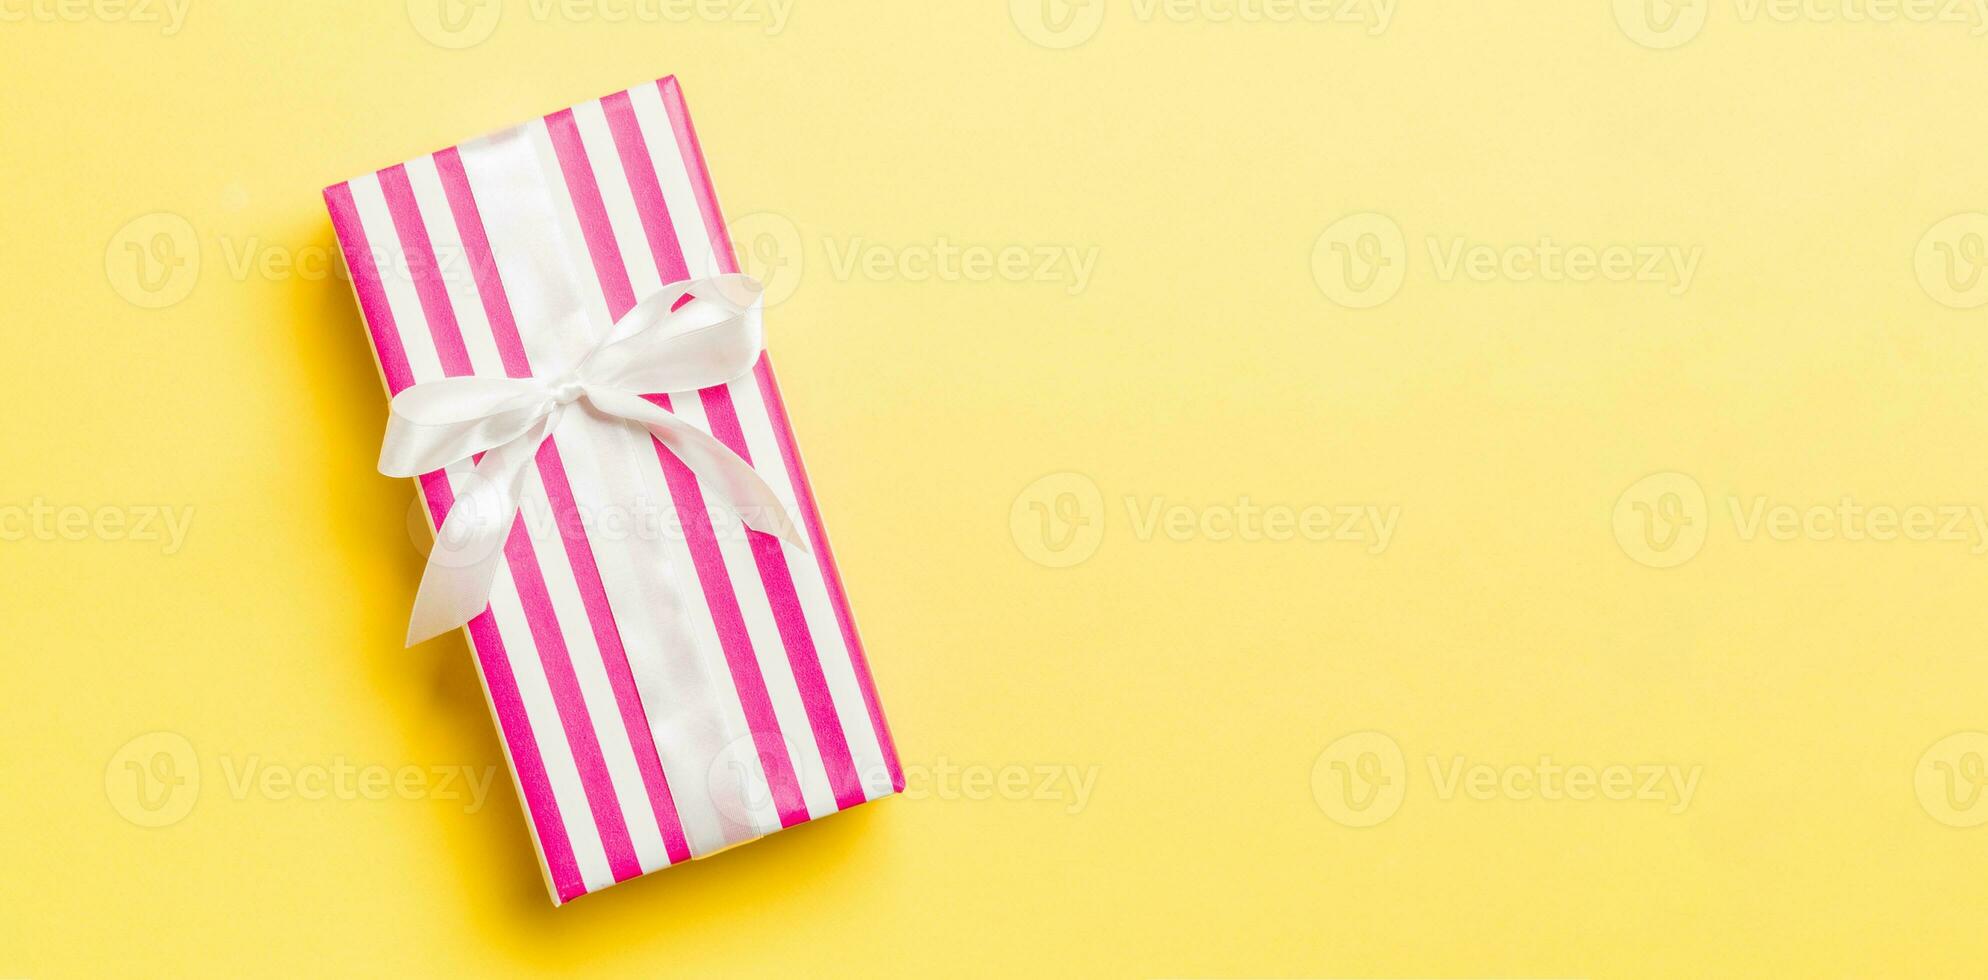 Top view Christmas present box with white bow on yellow background with copy space photo